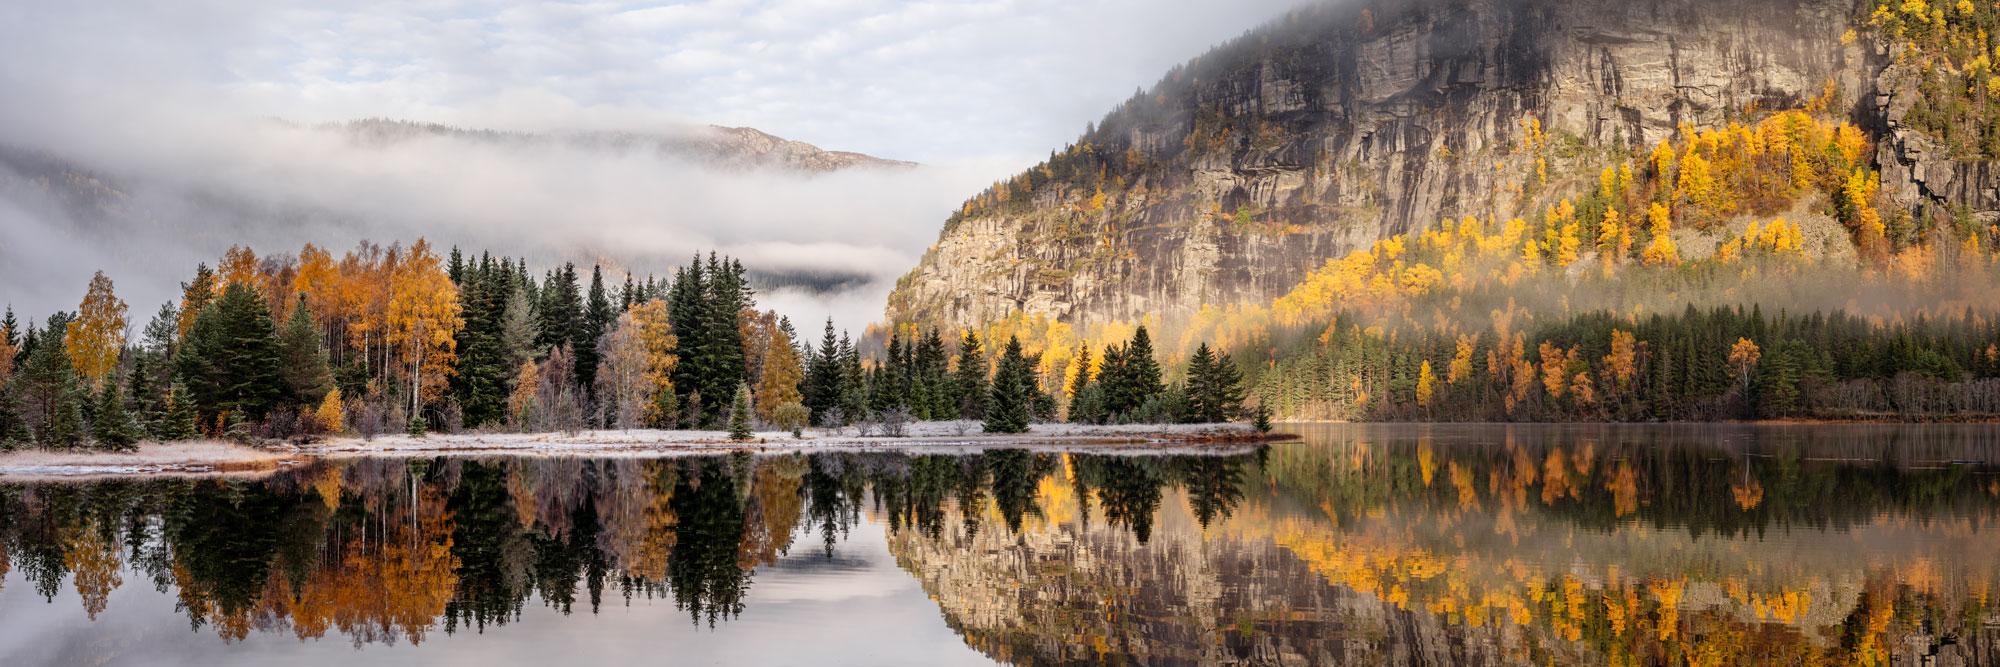 Panorama of the Otra river ishrouded in fog on an autumn morning in Norway